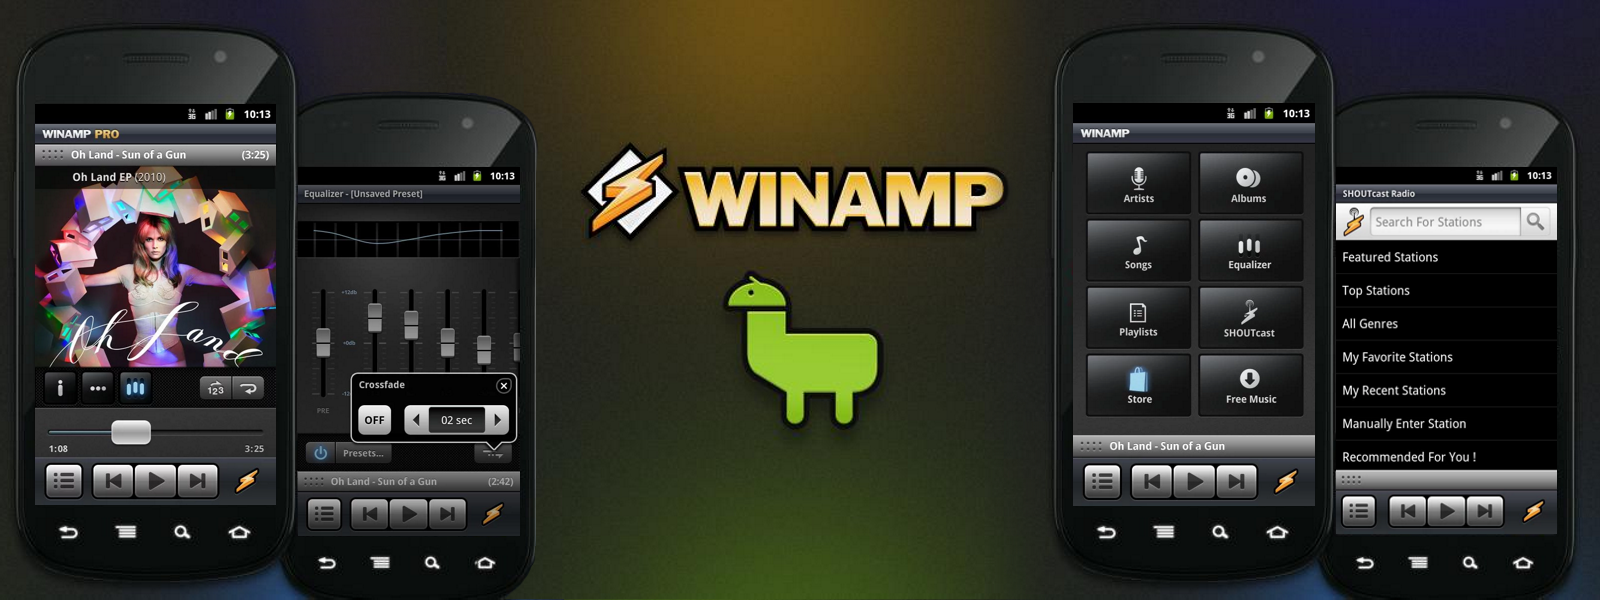 winamp full version for android free download